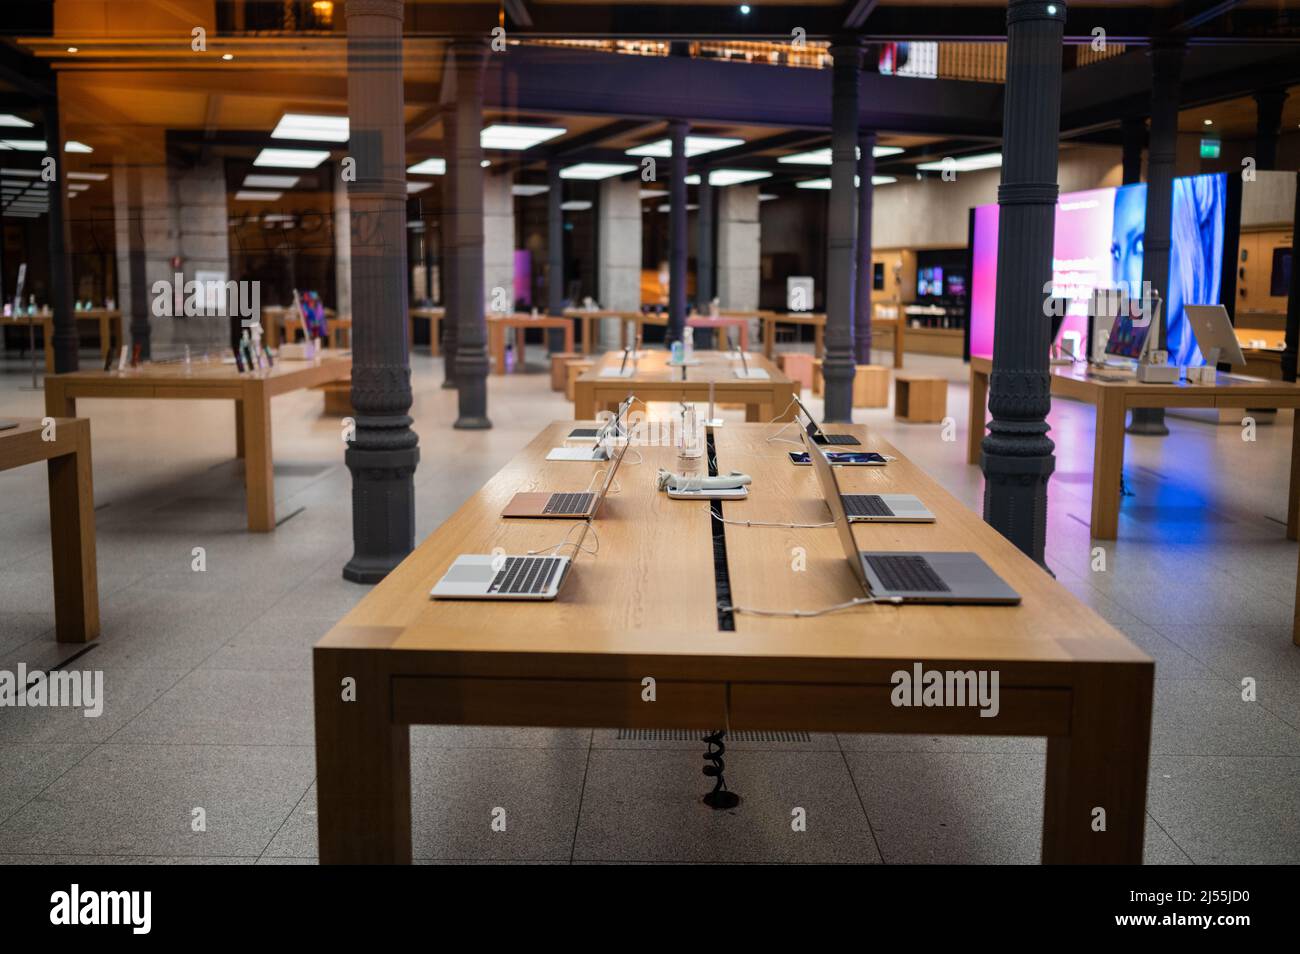 Interior view of Apple Store in Madrid Puerta del Sol without people inside Stock Photo